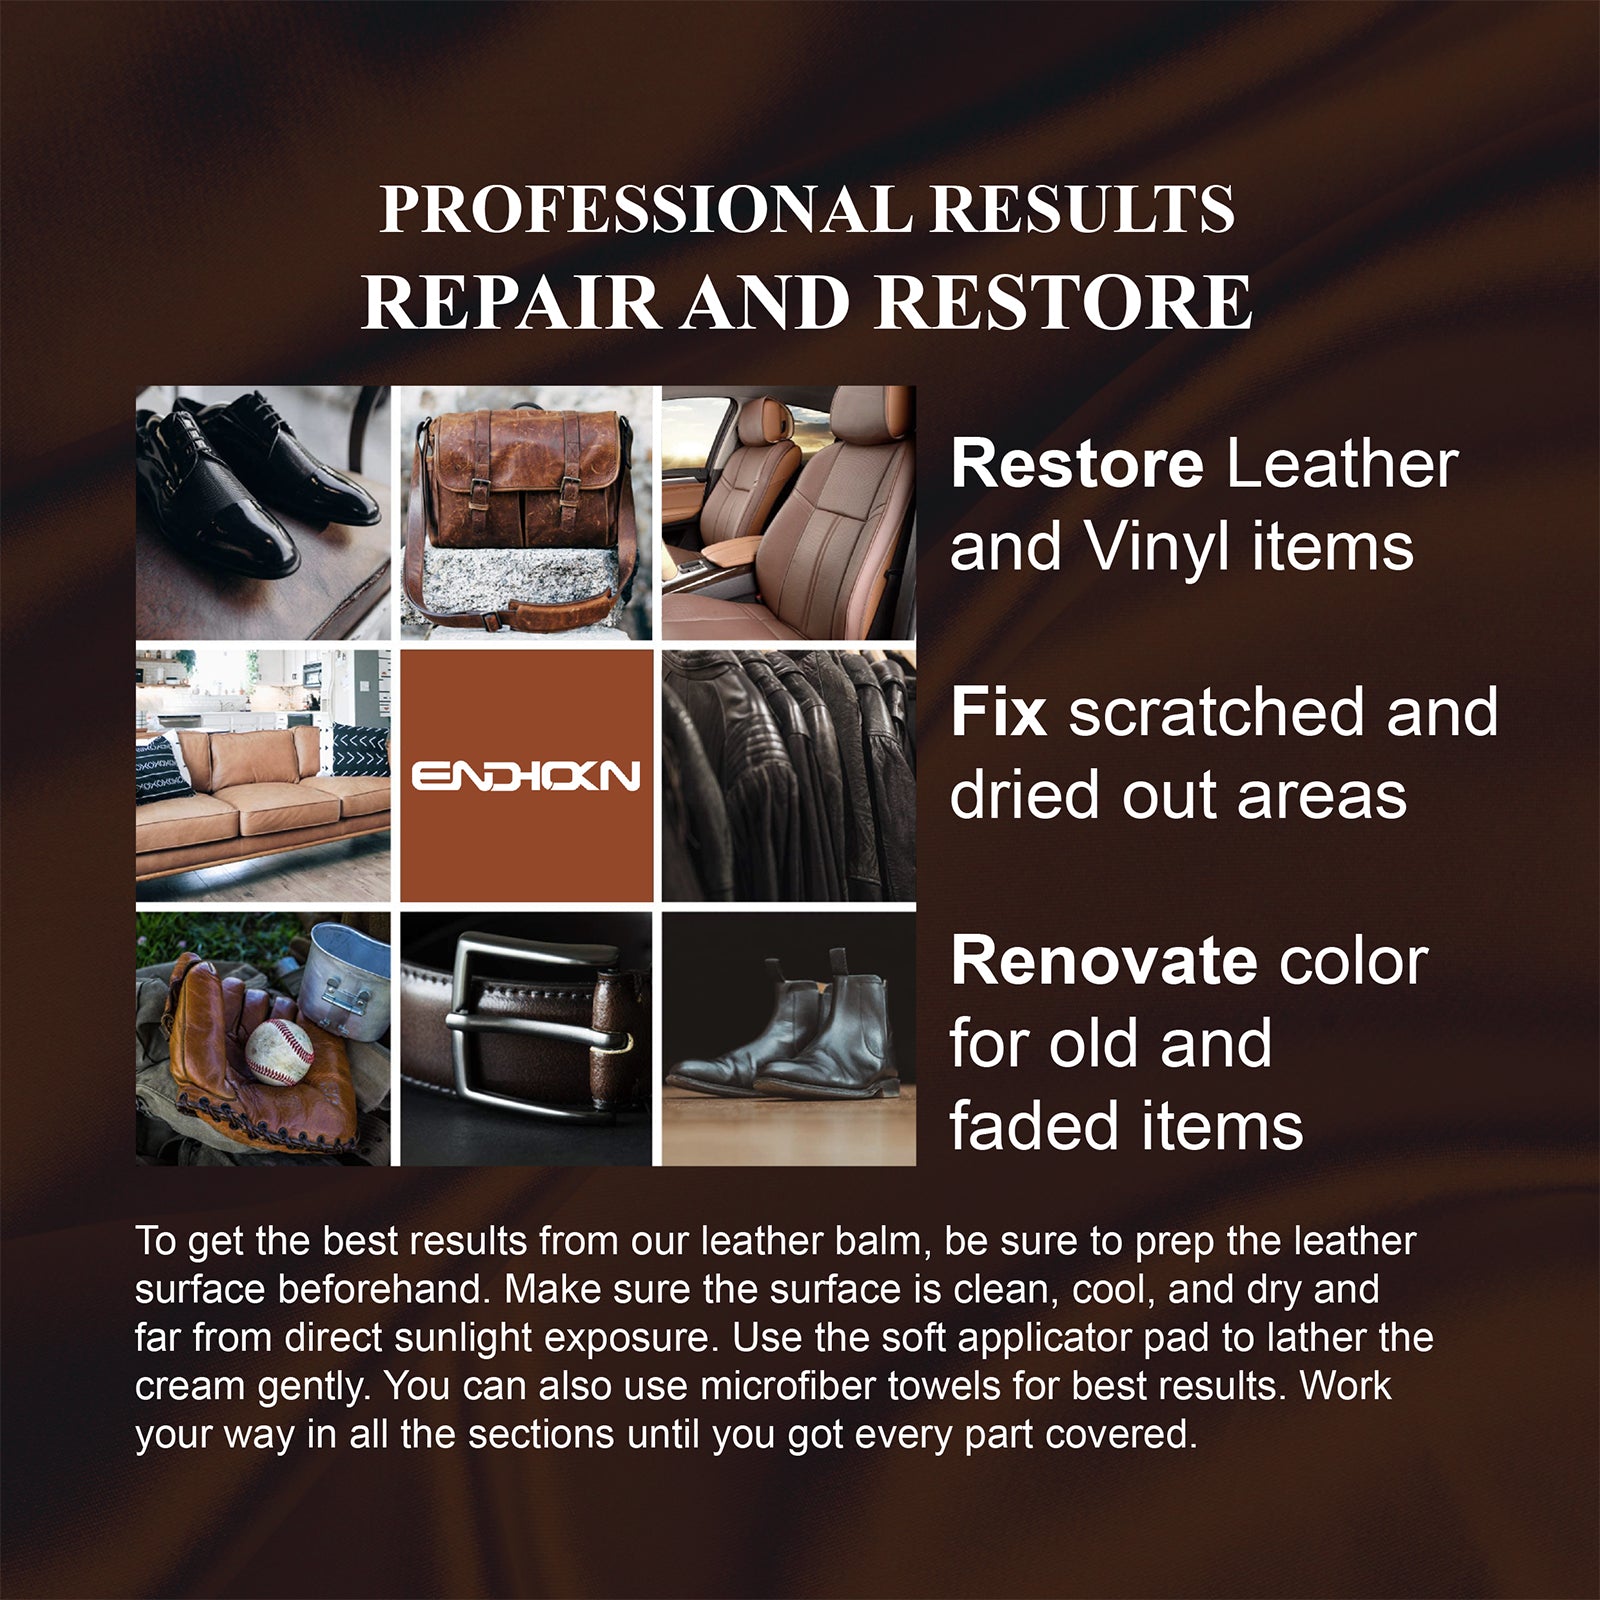 Leather and Vinyl Repair Kit 5 Colors, Endhokn Leather Repair Kit for Sofas, Car Seats, Jackets, Bags, Purse, Belts, Shoes, Holes and Scratch